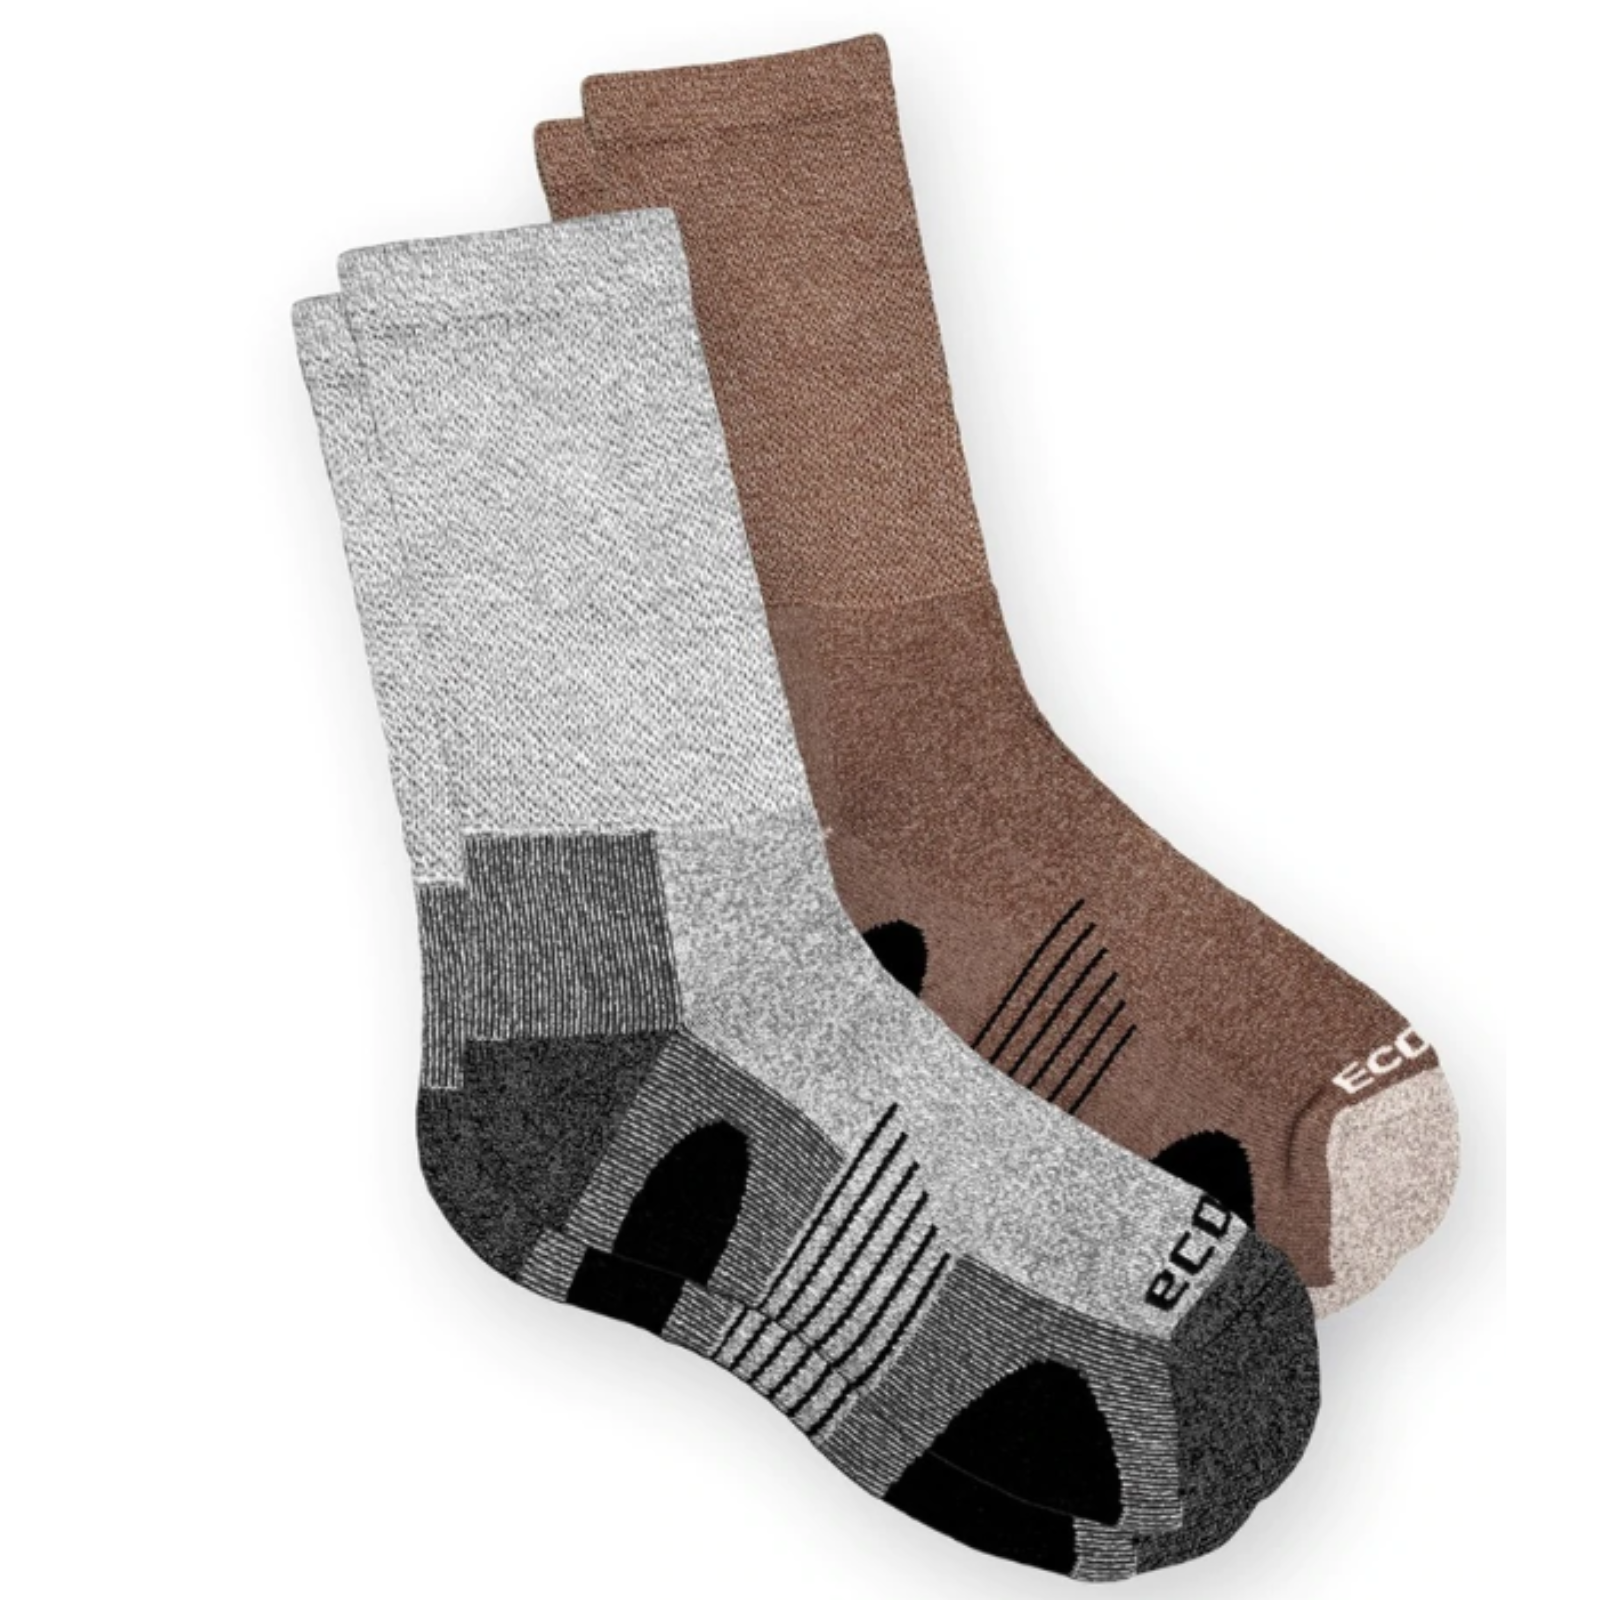 EcoSox Diabetic Non-Binding Bamboo Crew Hiking/Outdoor women's and men's socks in gray and brown